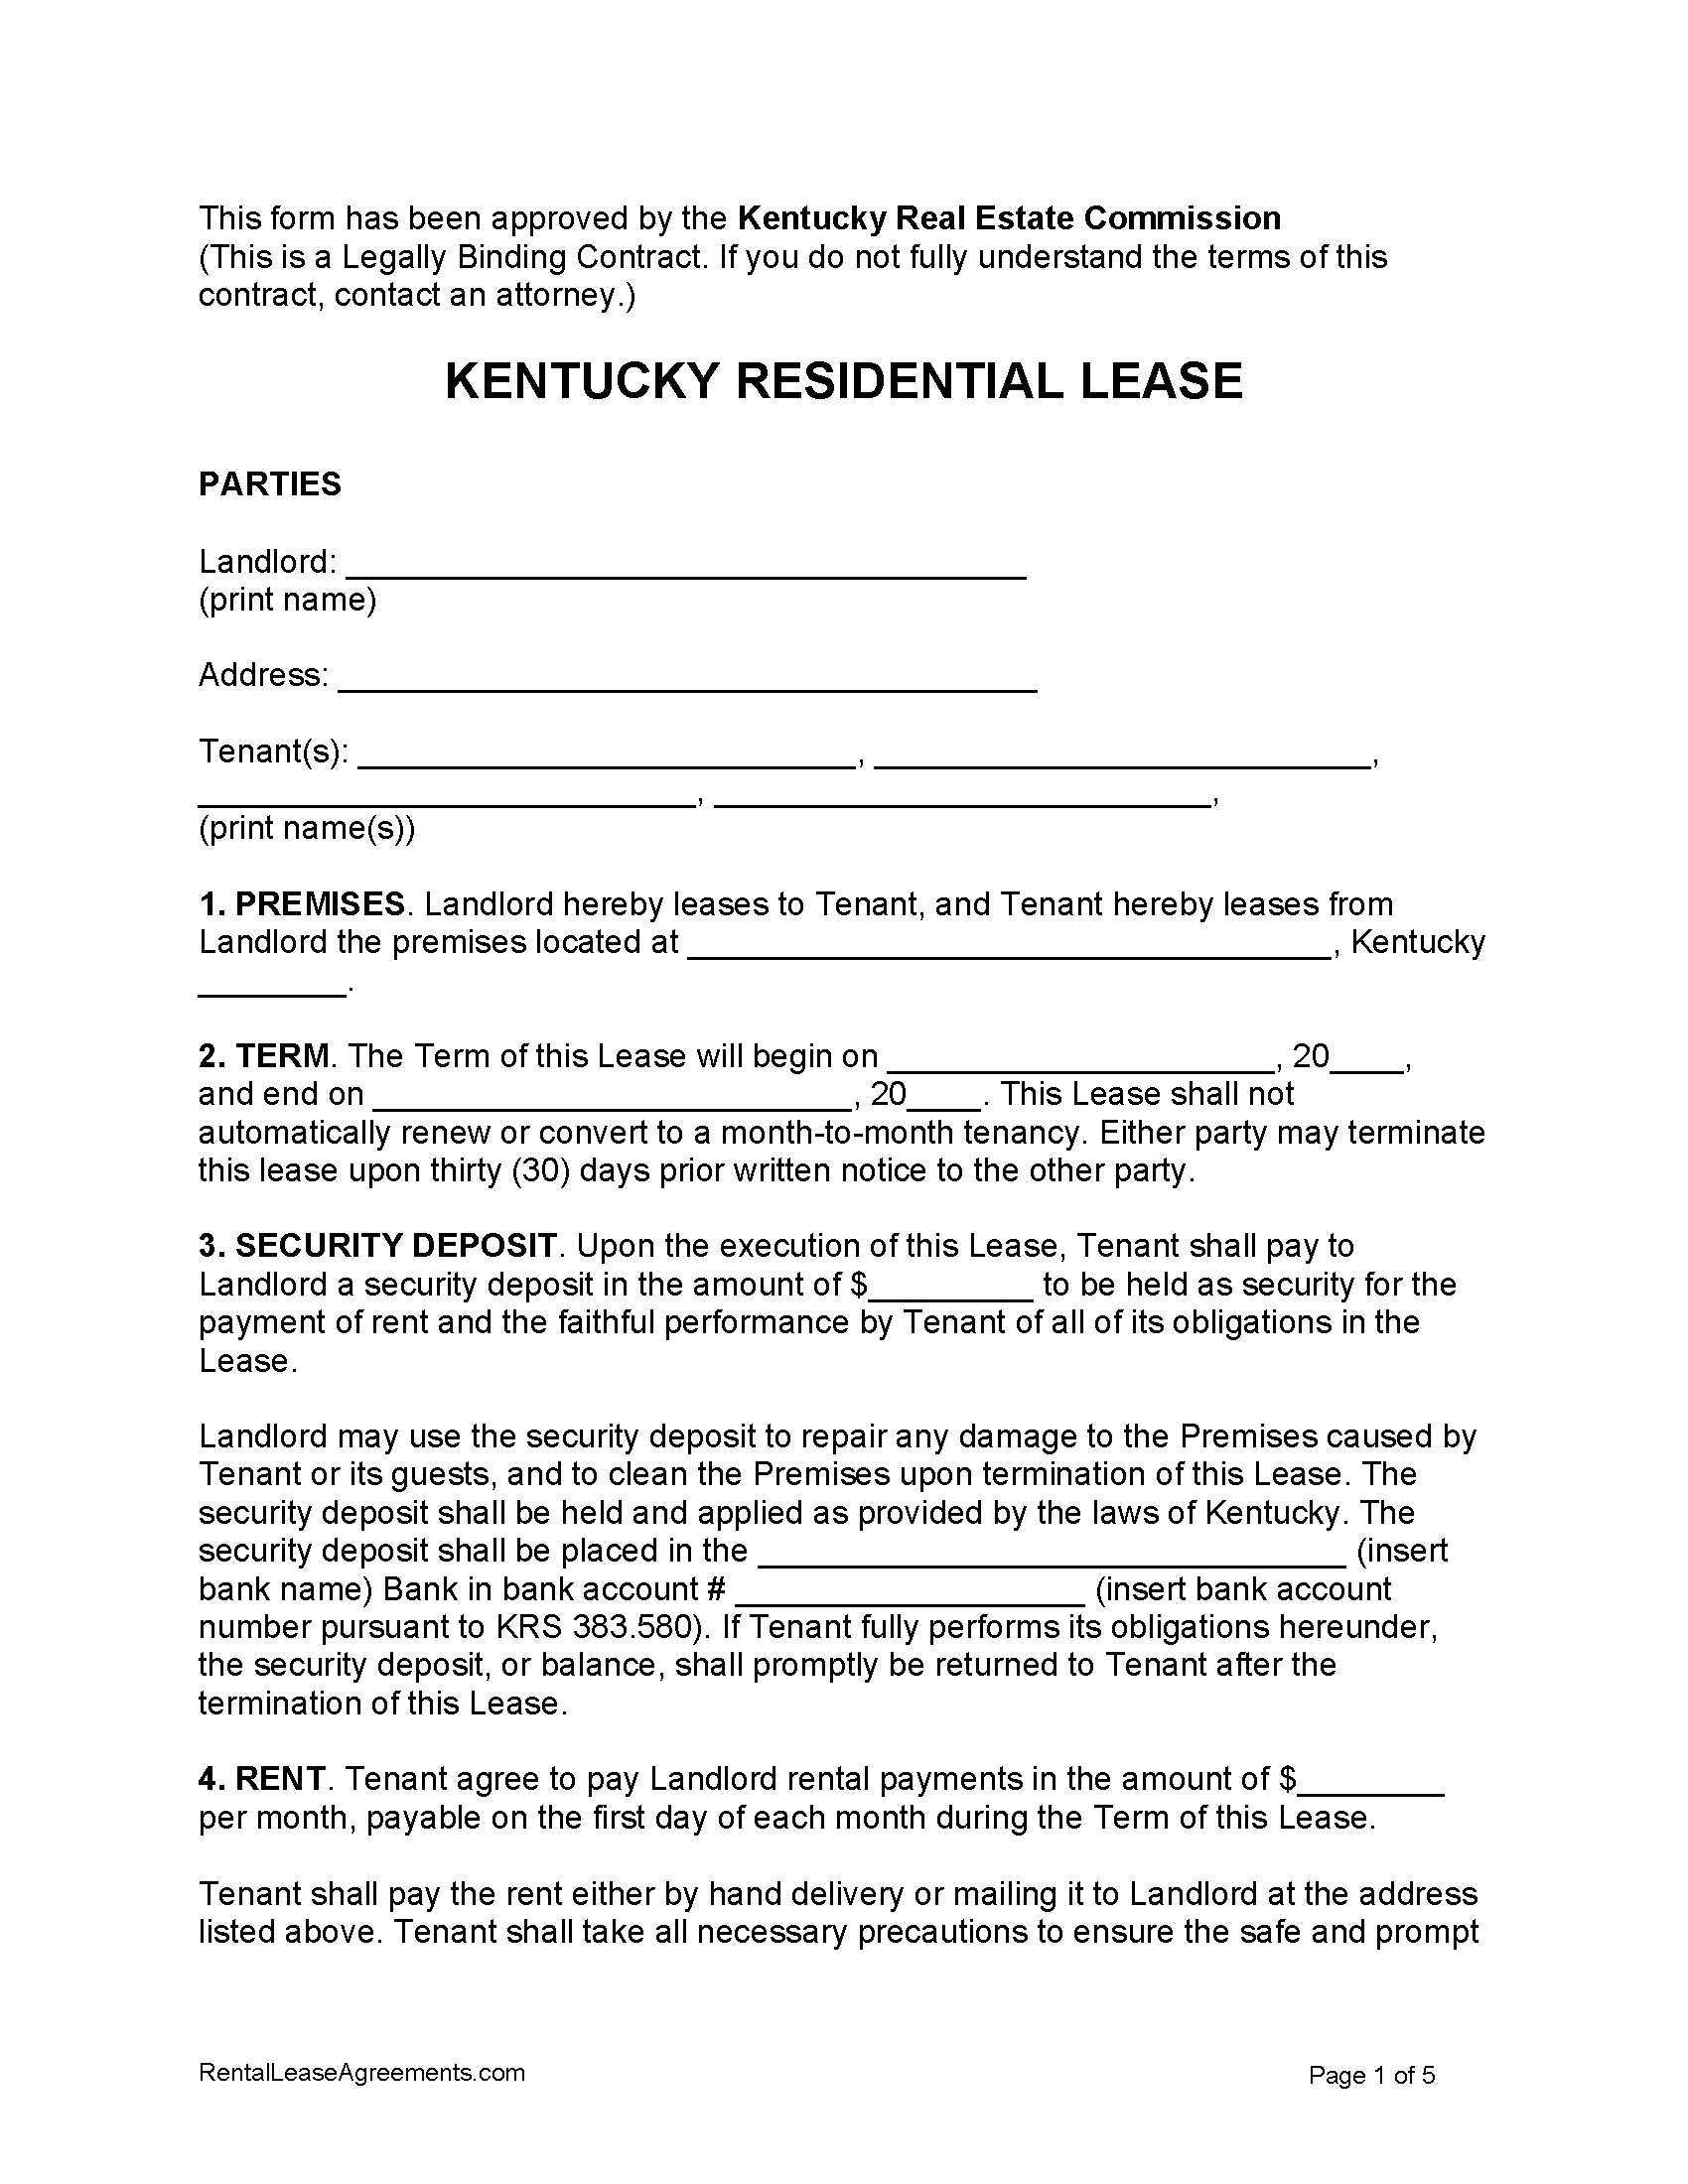 free kentucky residential lease agreement pdf ms word